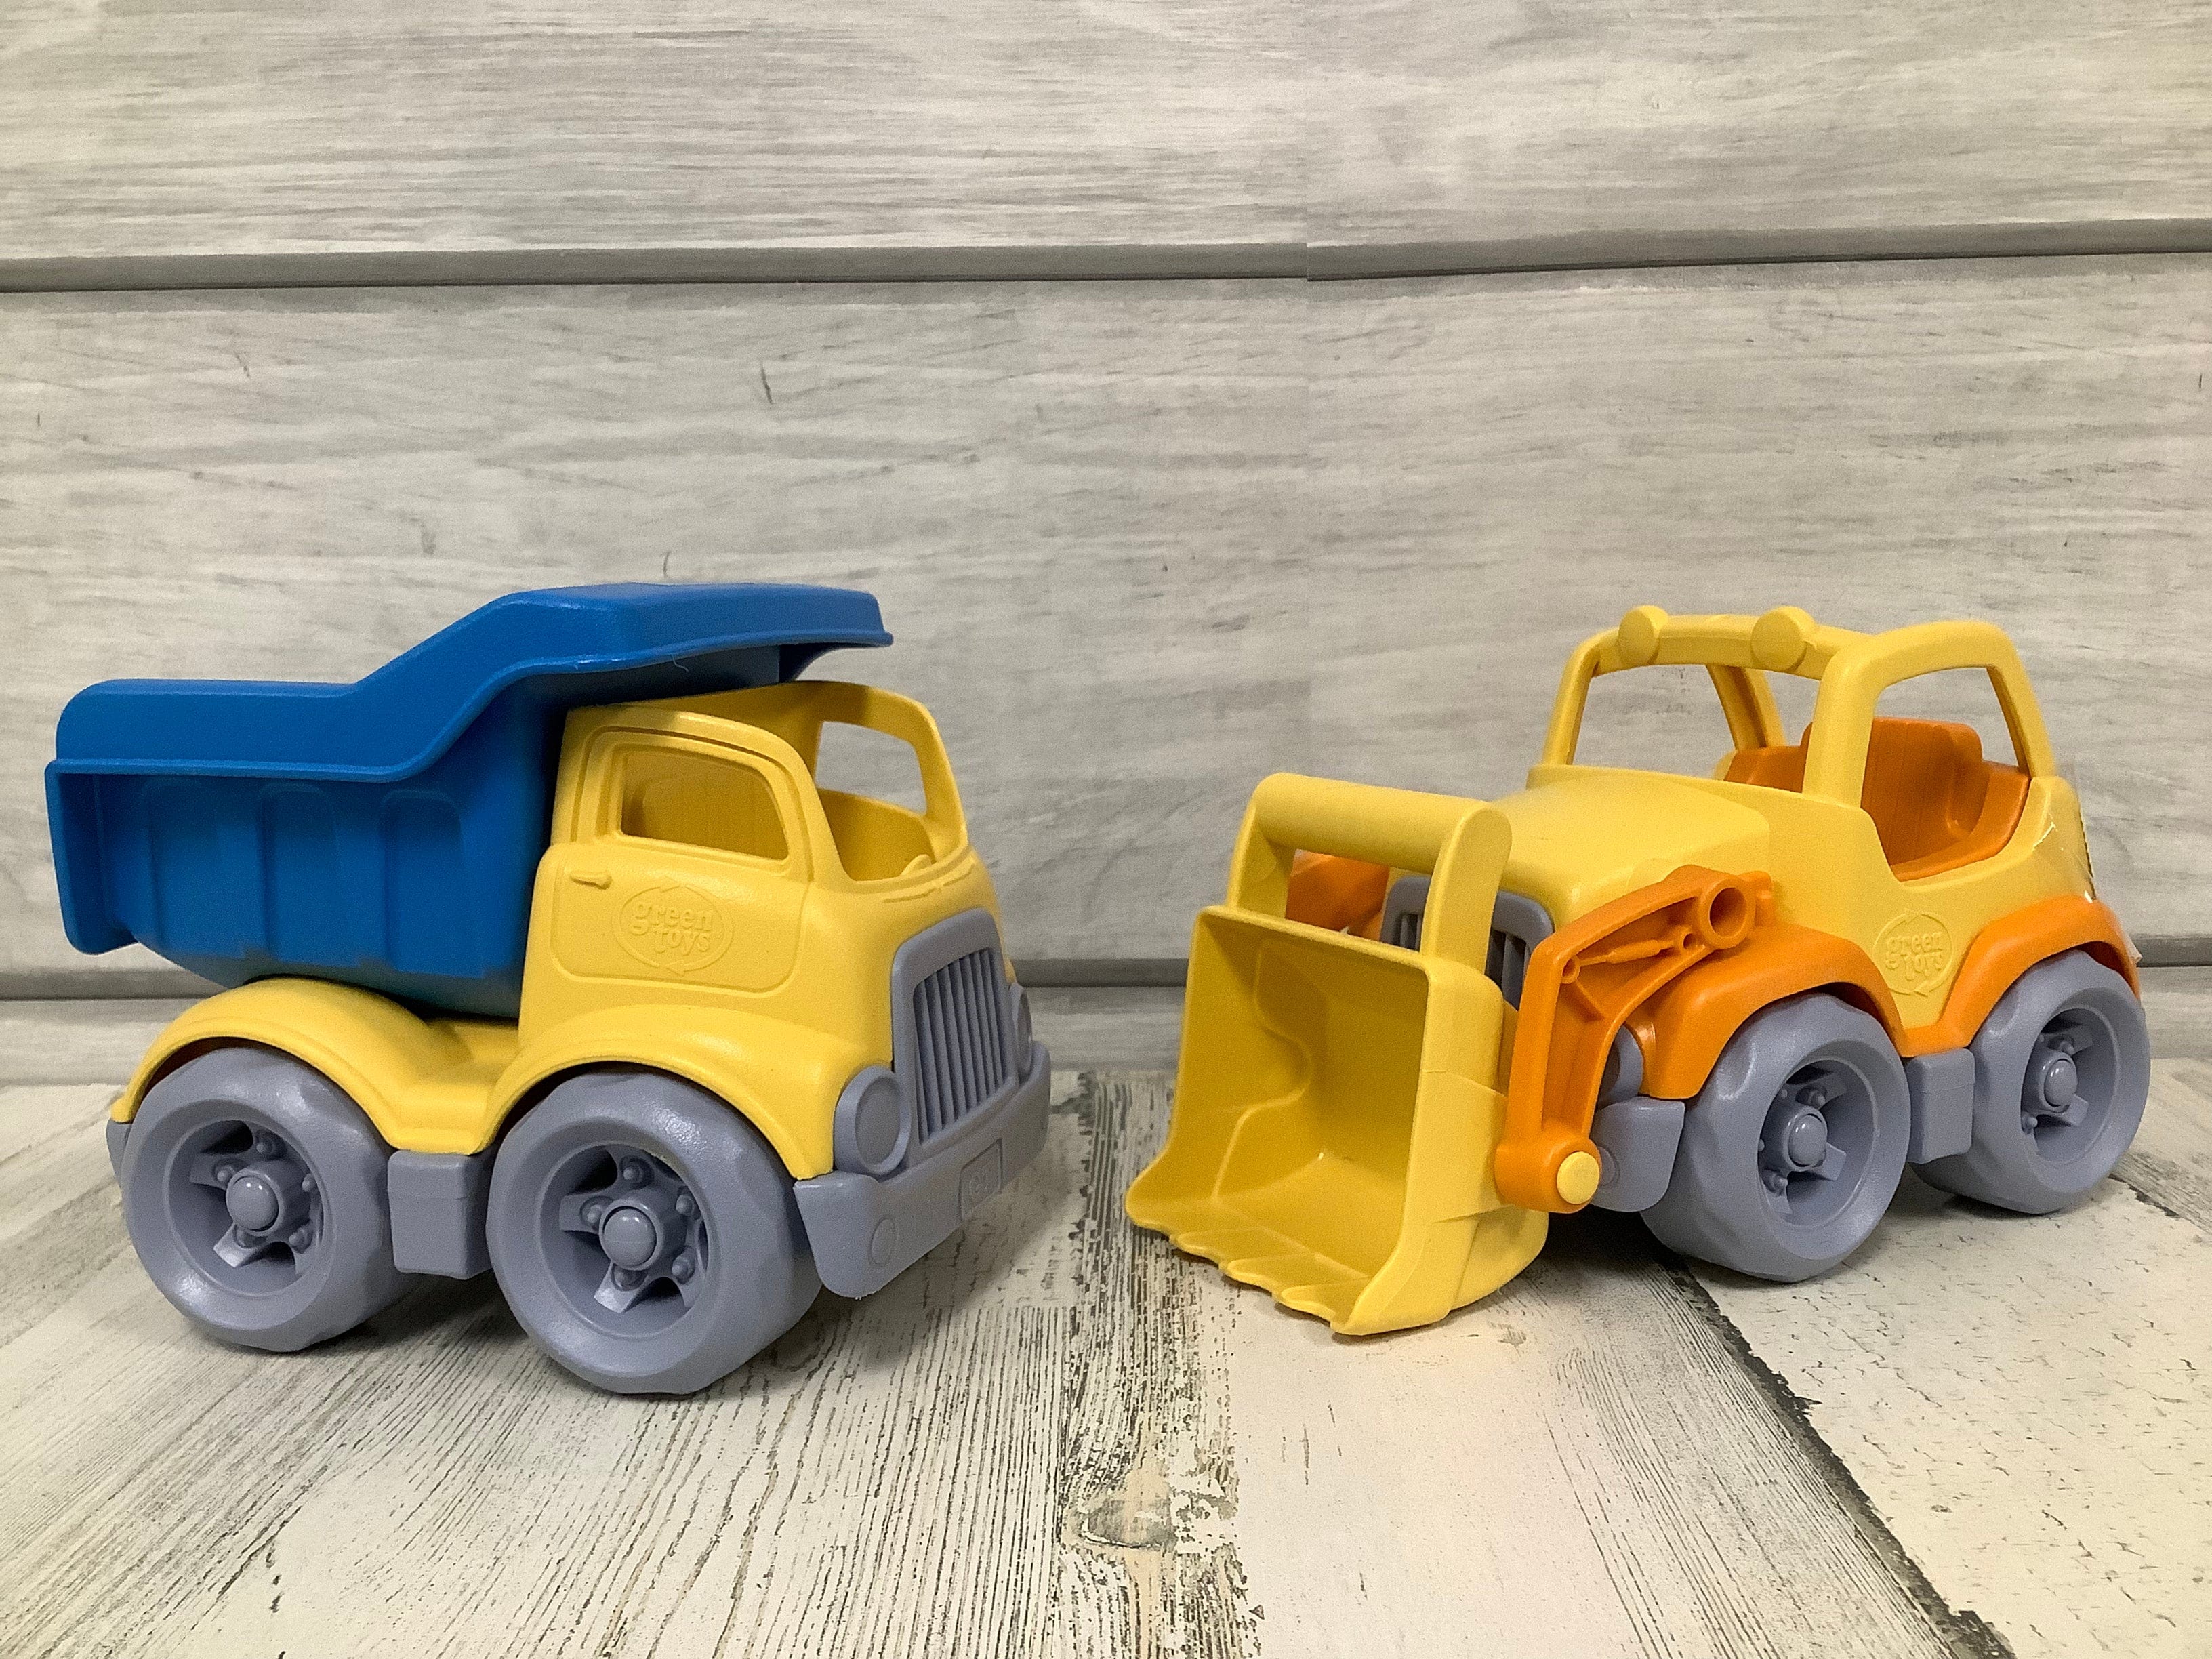 Minnows Childhood Goods Green Toys, Set of 2 Construction Trucks *In Store Pick Up*